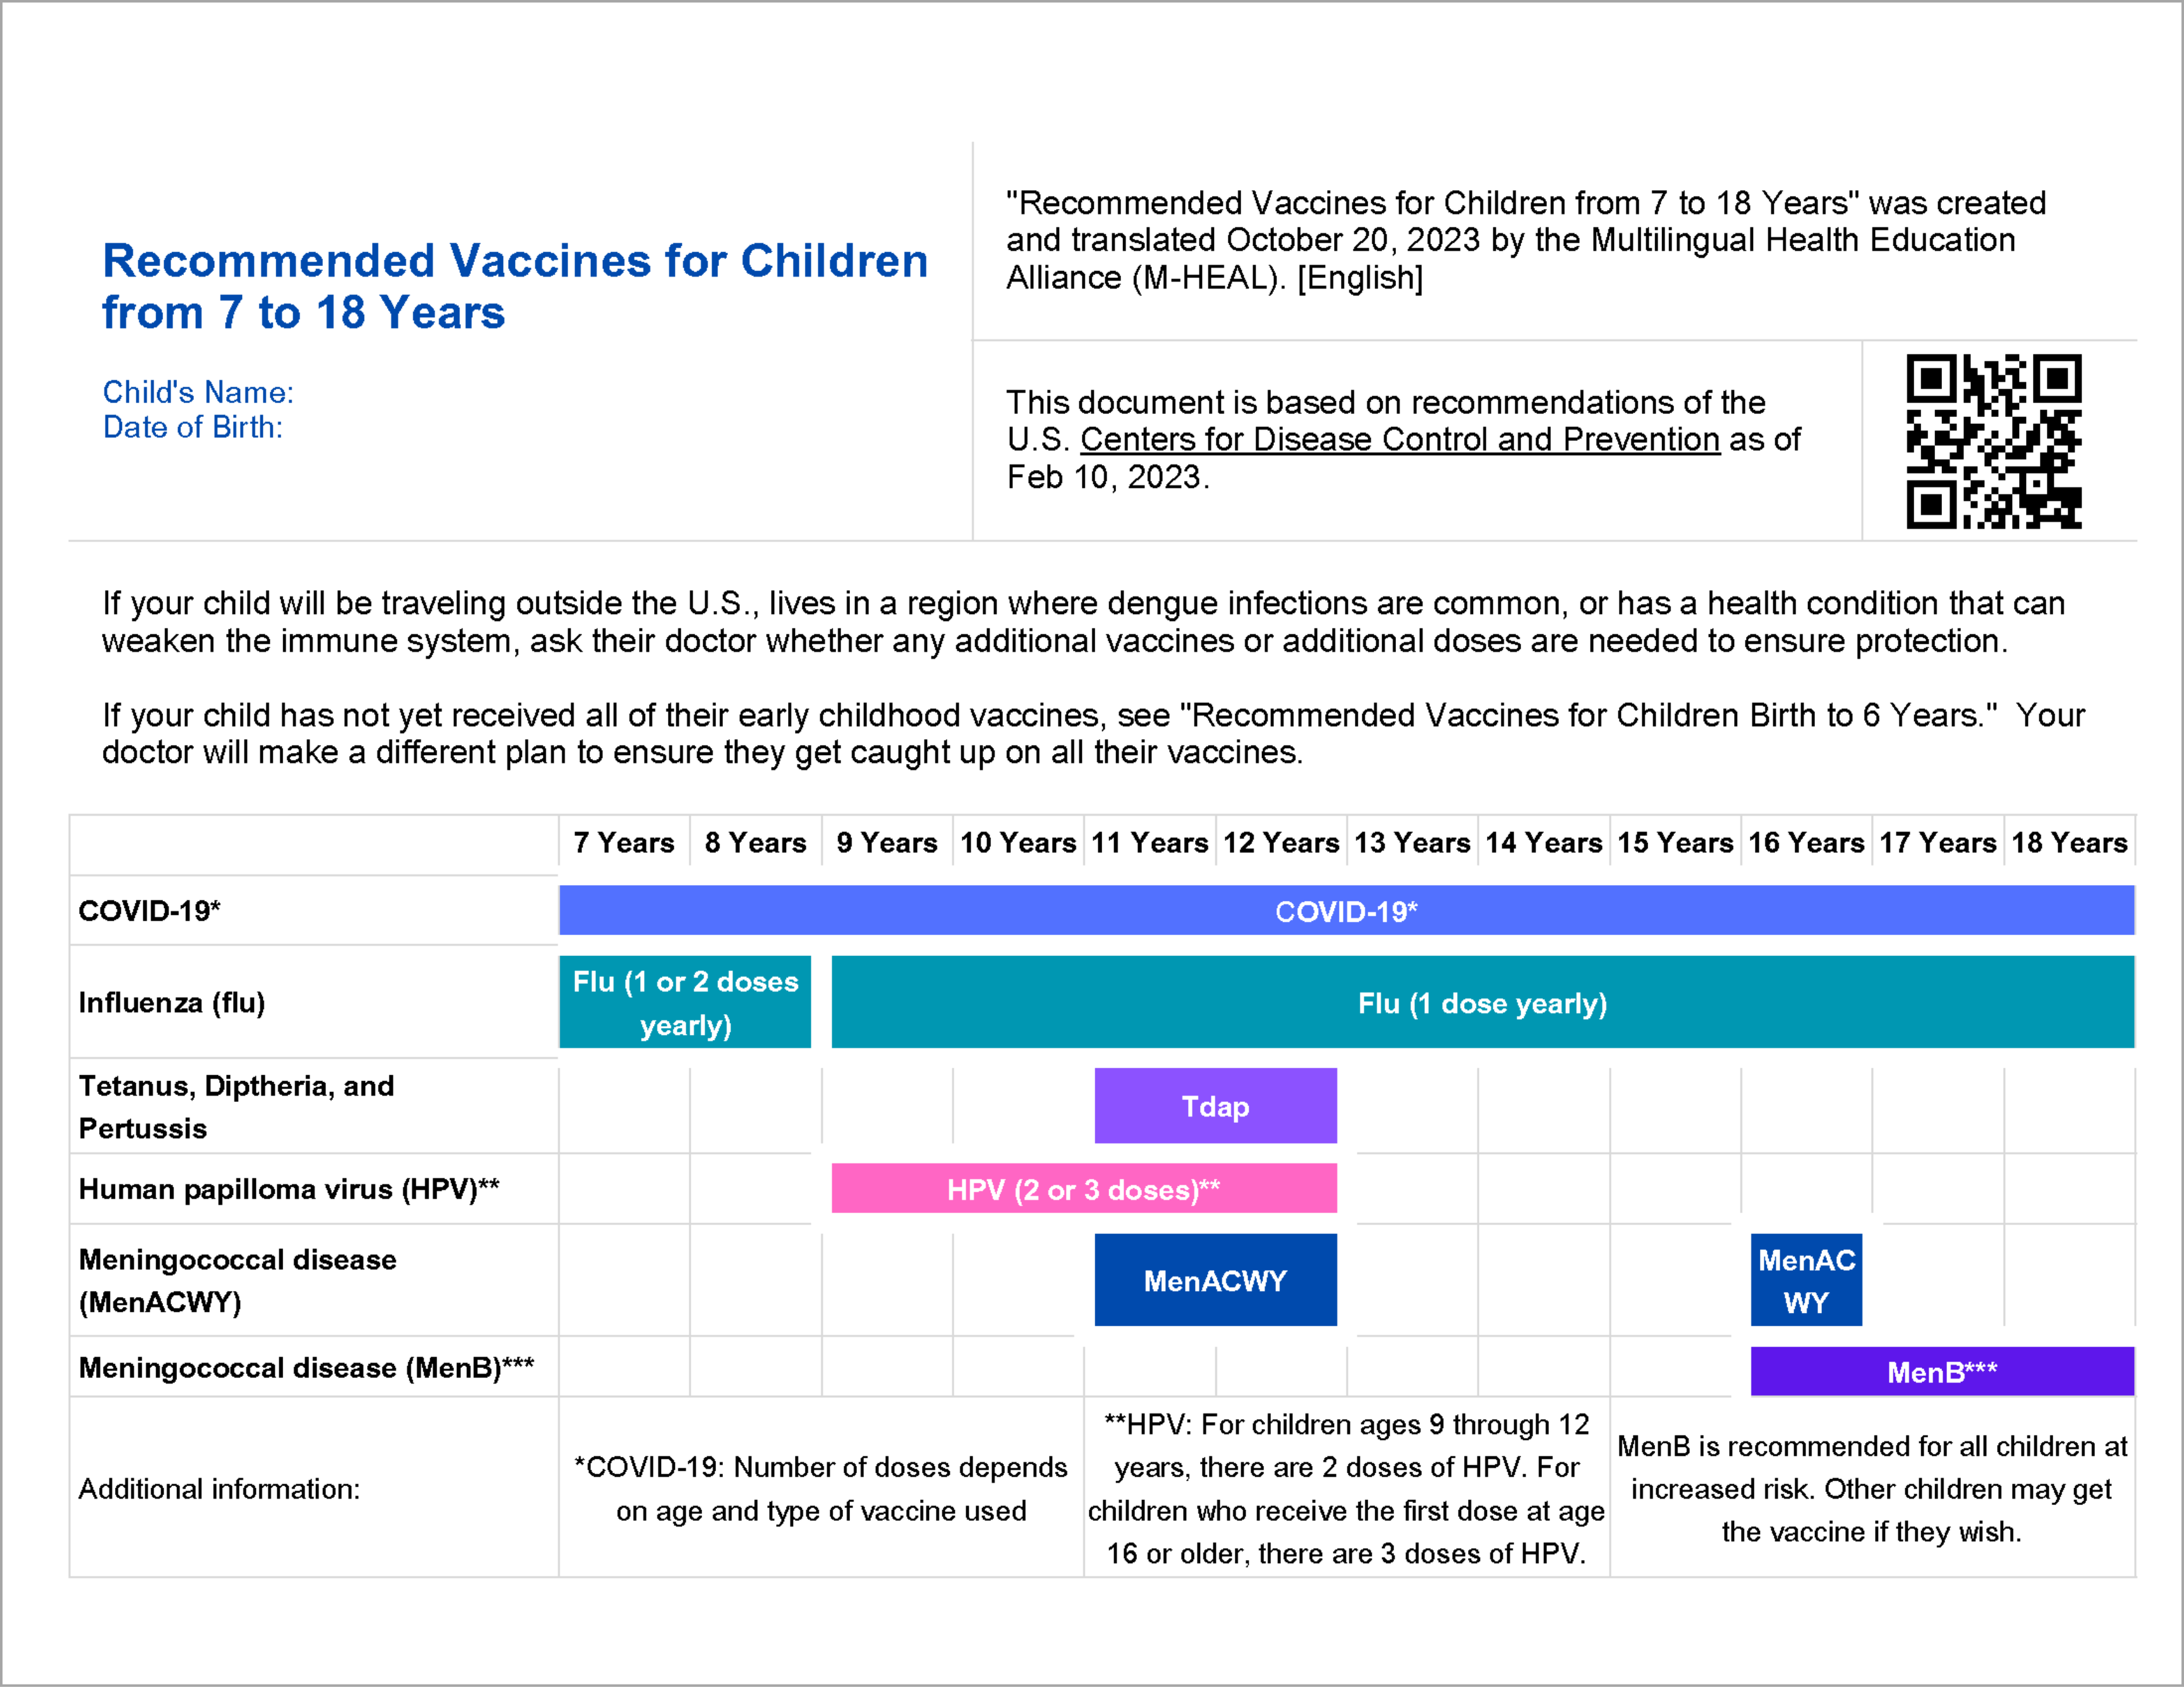 Recommended Vaccines for Children from 7 to 18 Years